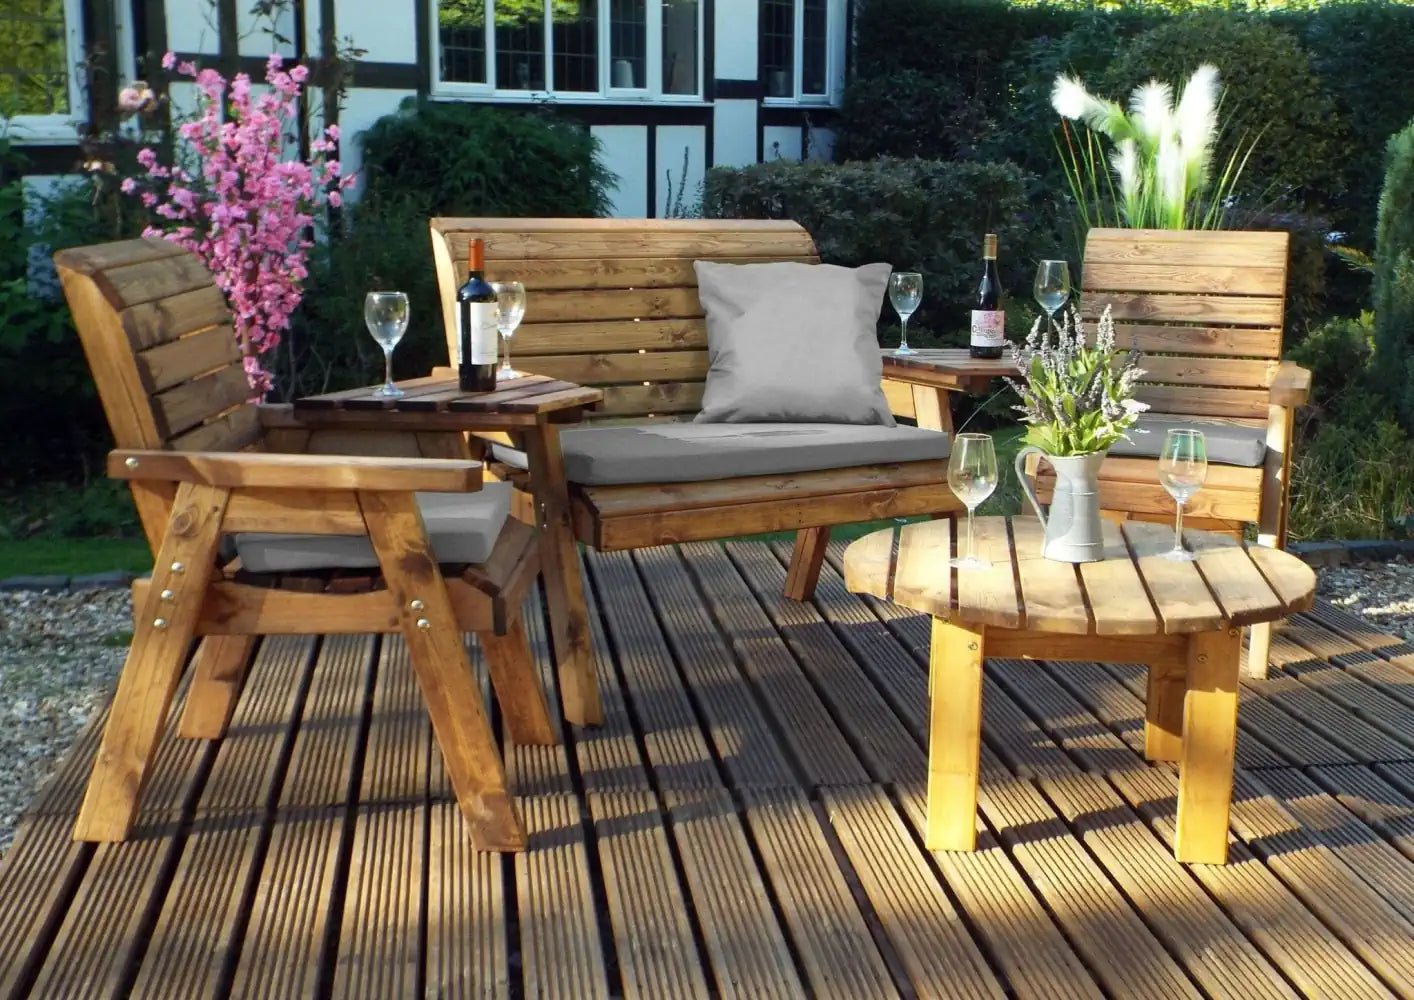 Scatter Grey Cushions for Outdoor Dining by Woven Wood